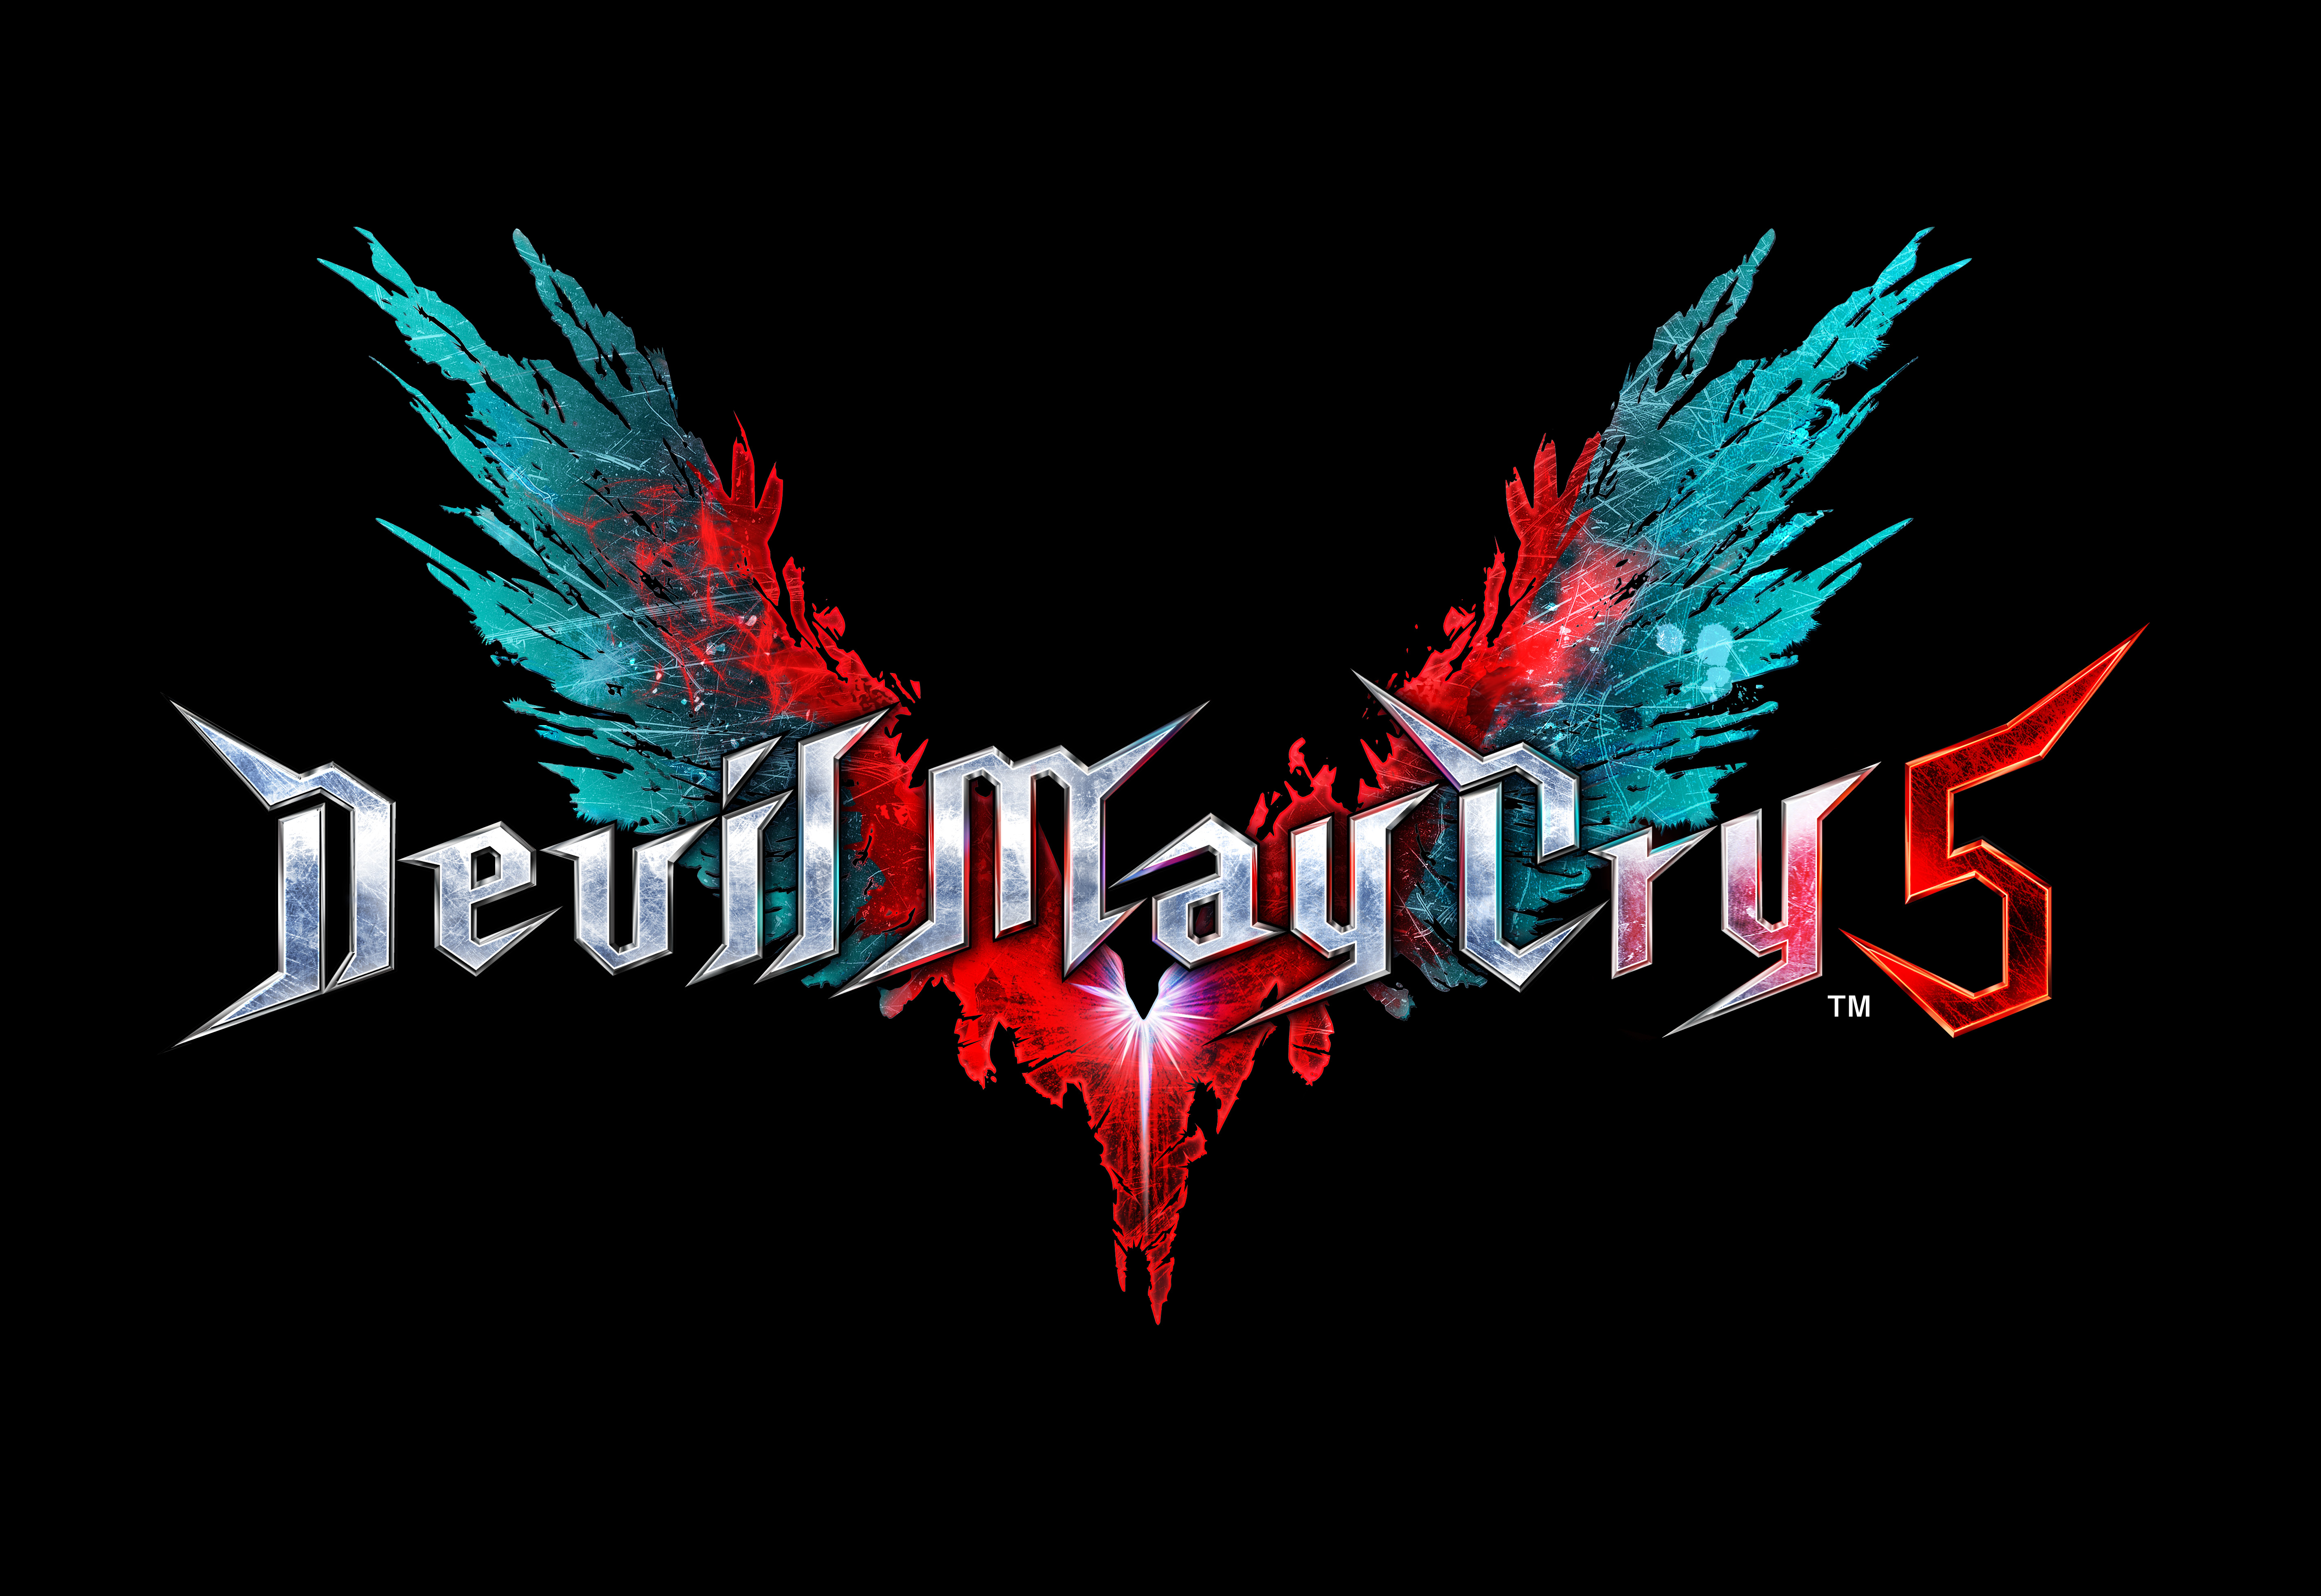 devil may cry 5, video game, devil may cry cellphone